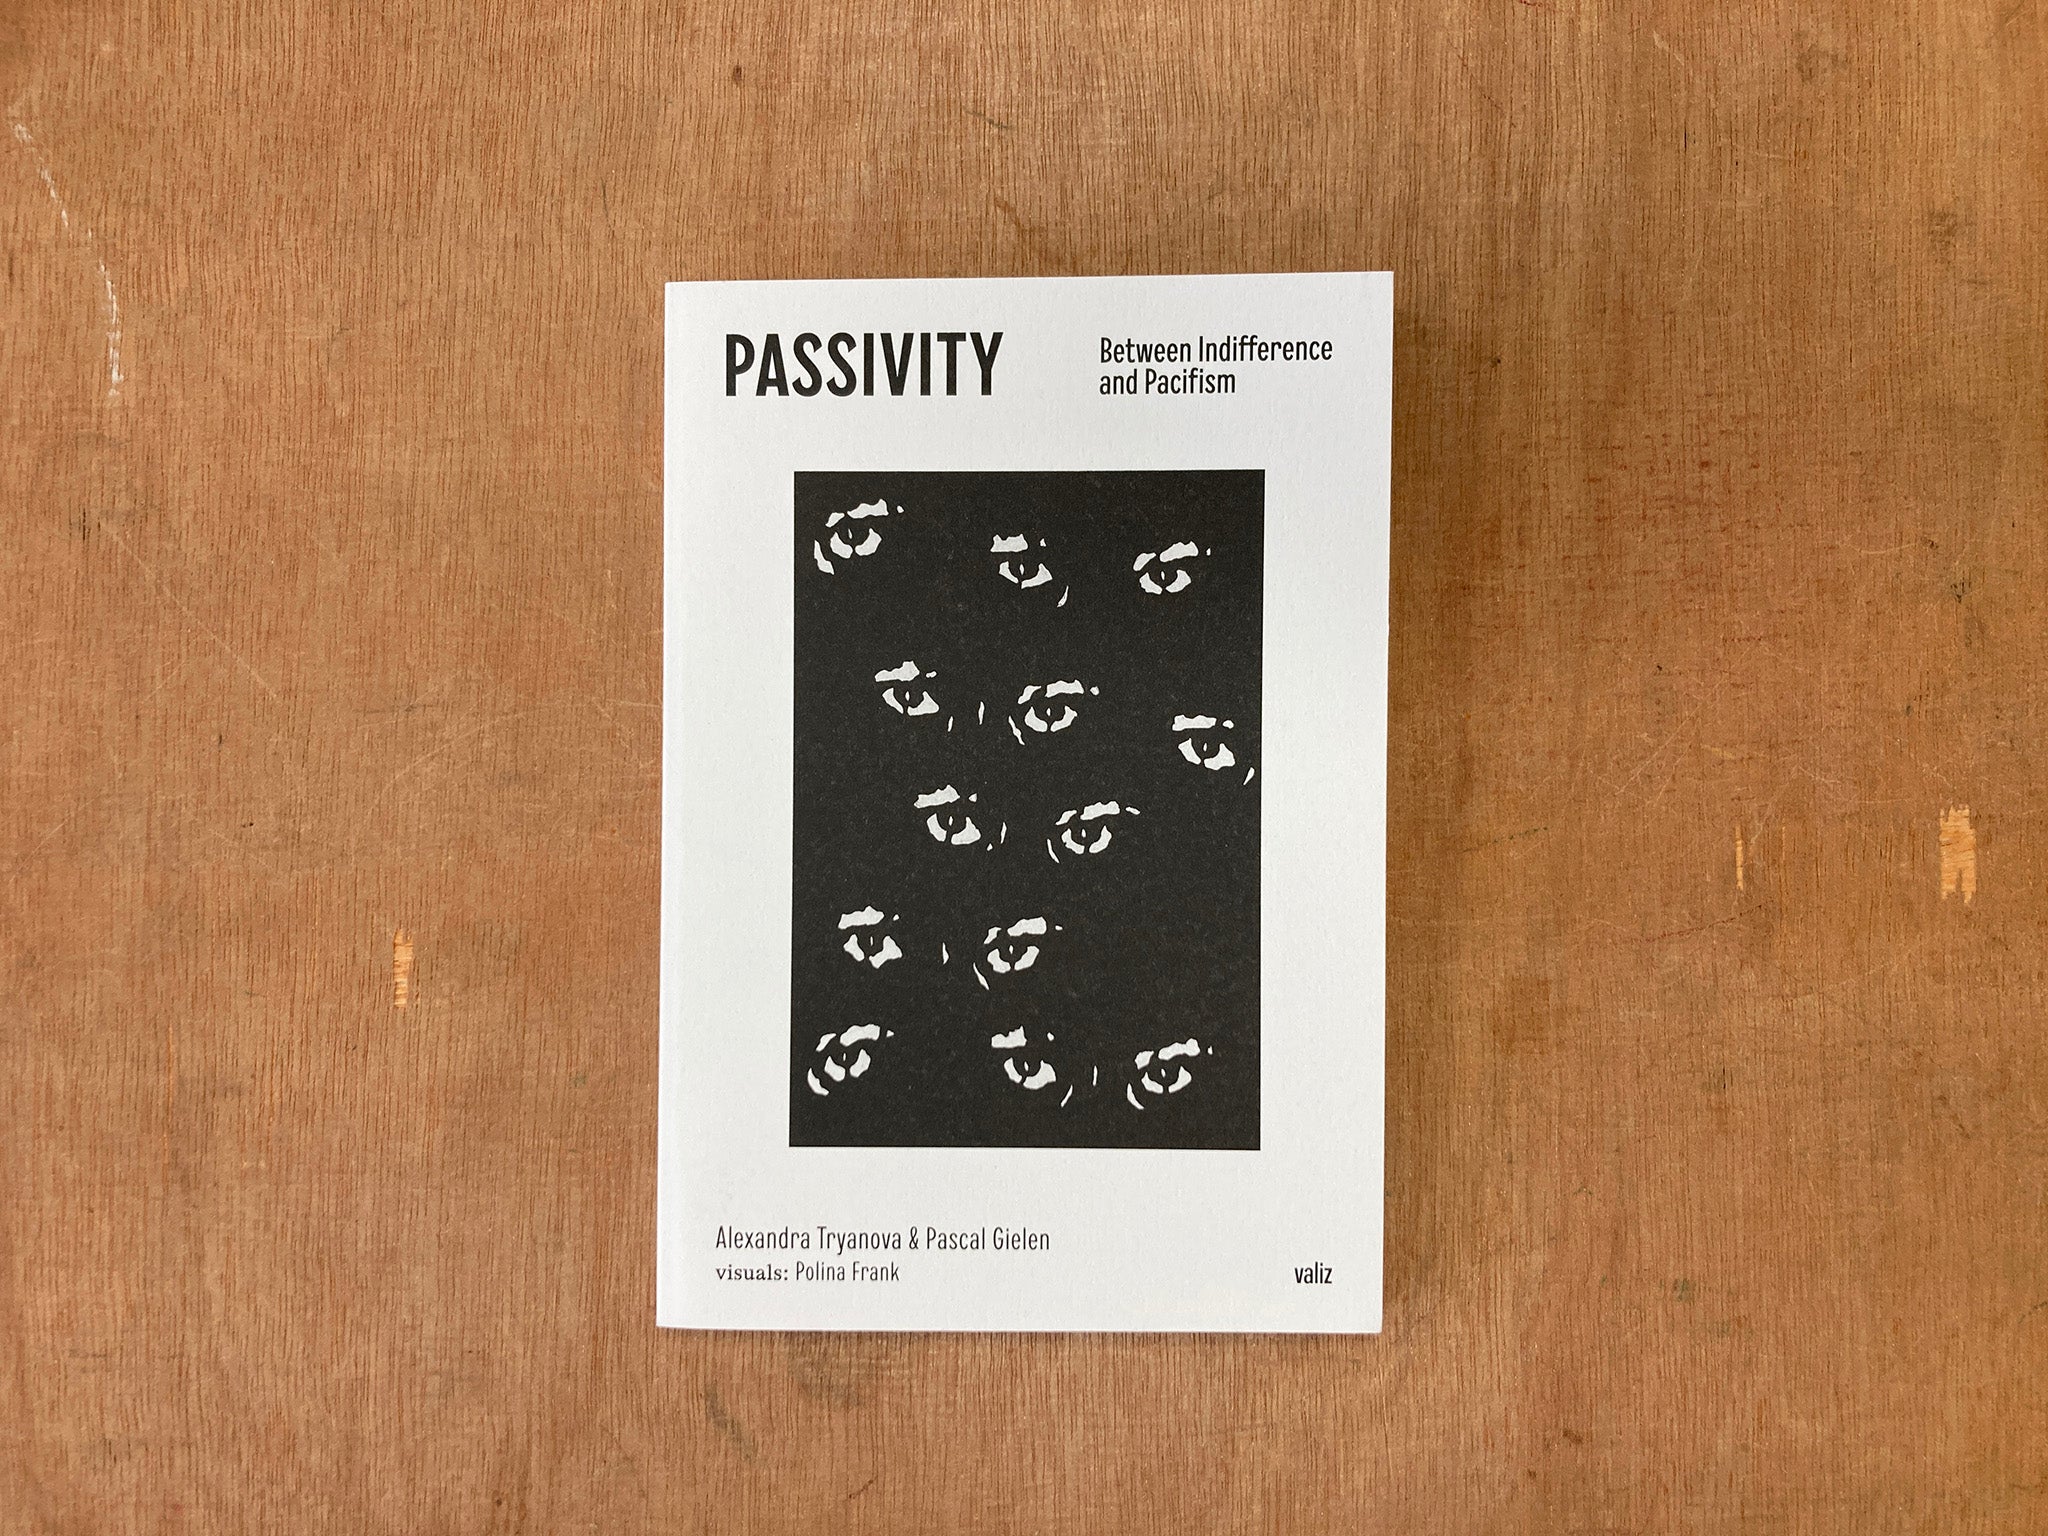 PASSIVITY: BETWEEN RESIGNATION AND PACIFISM by Alexandra Tryanova, Pascal Gielen and Polina Frank